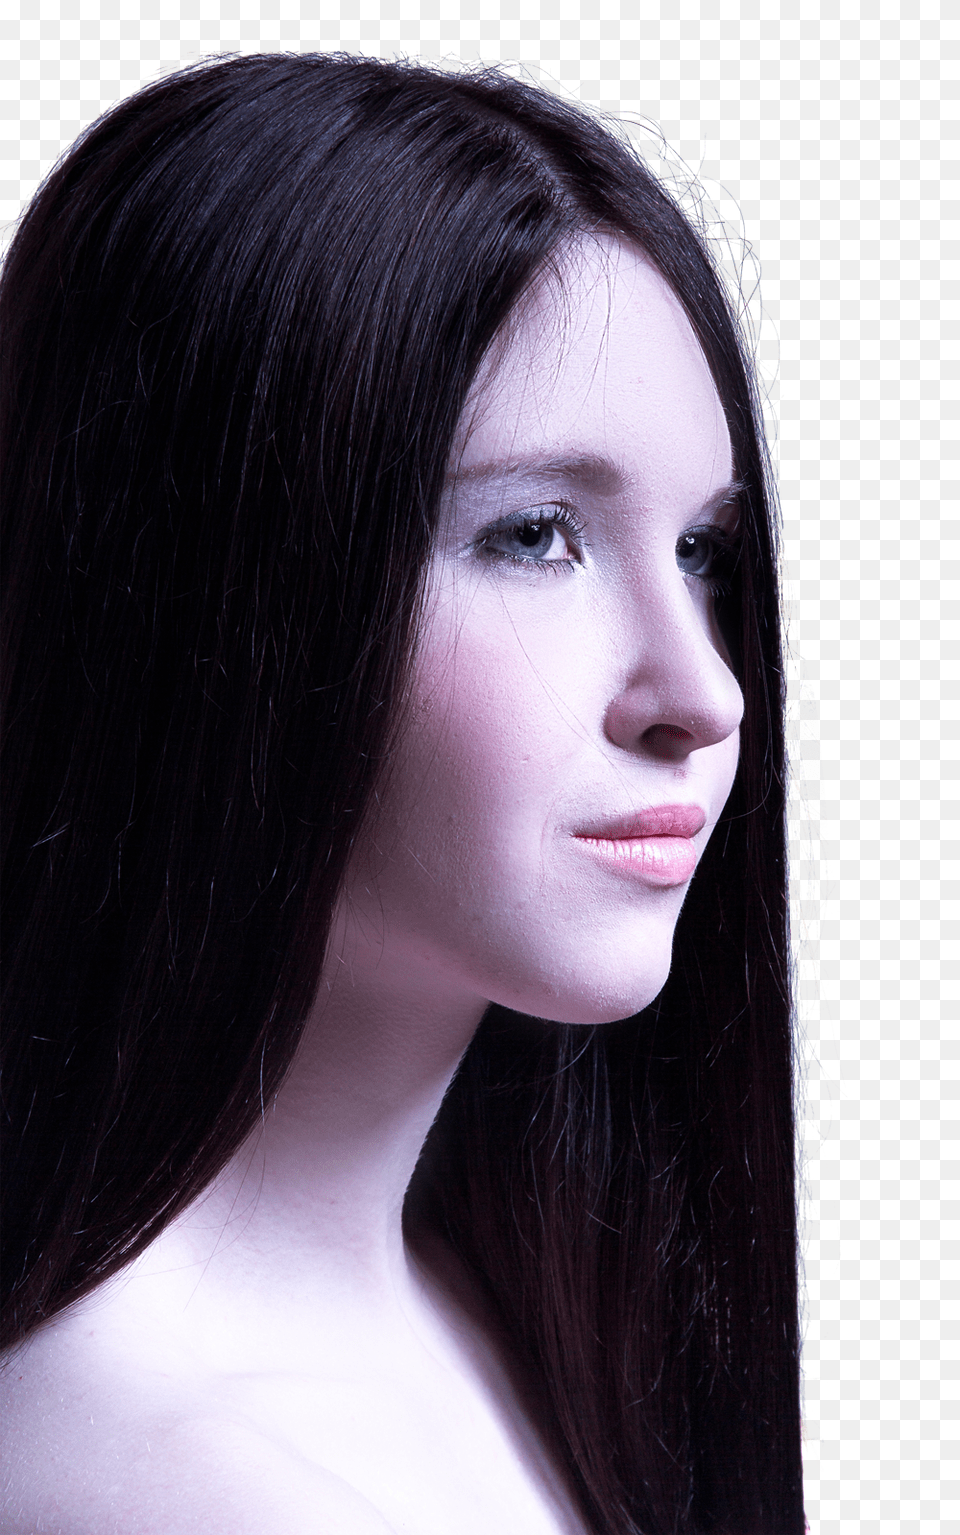 Pngpix Com Woman With Long Healthy Straight Hair Image, Adult, Portrait, Photography, Person Free Transparent Png